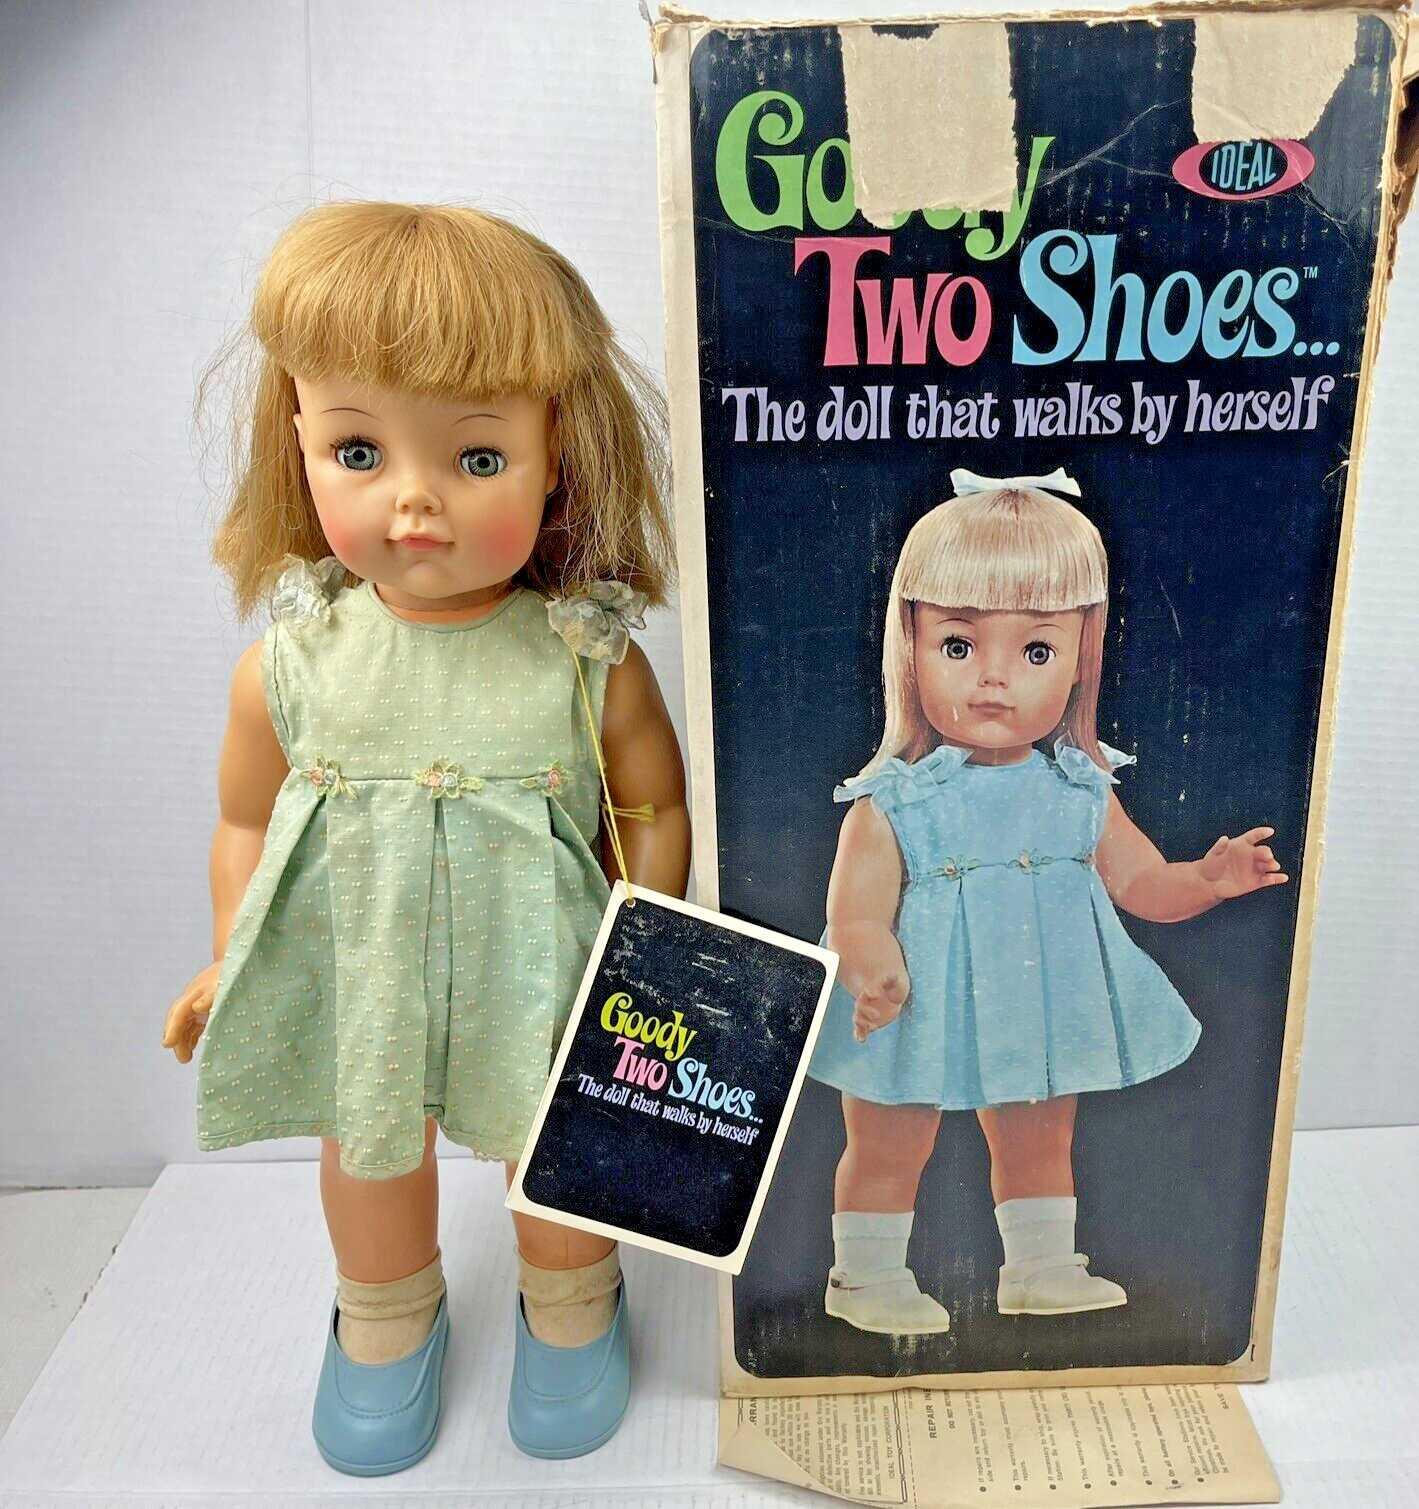 Vintage Ideal Toys Goody Two Shoes Doll 19" Battery Walker 1965 Original Box - $92.15